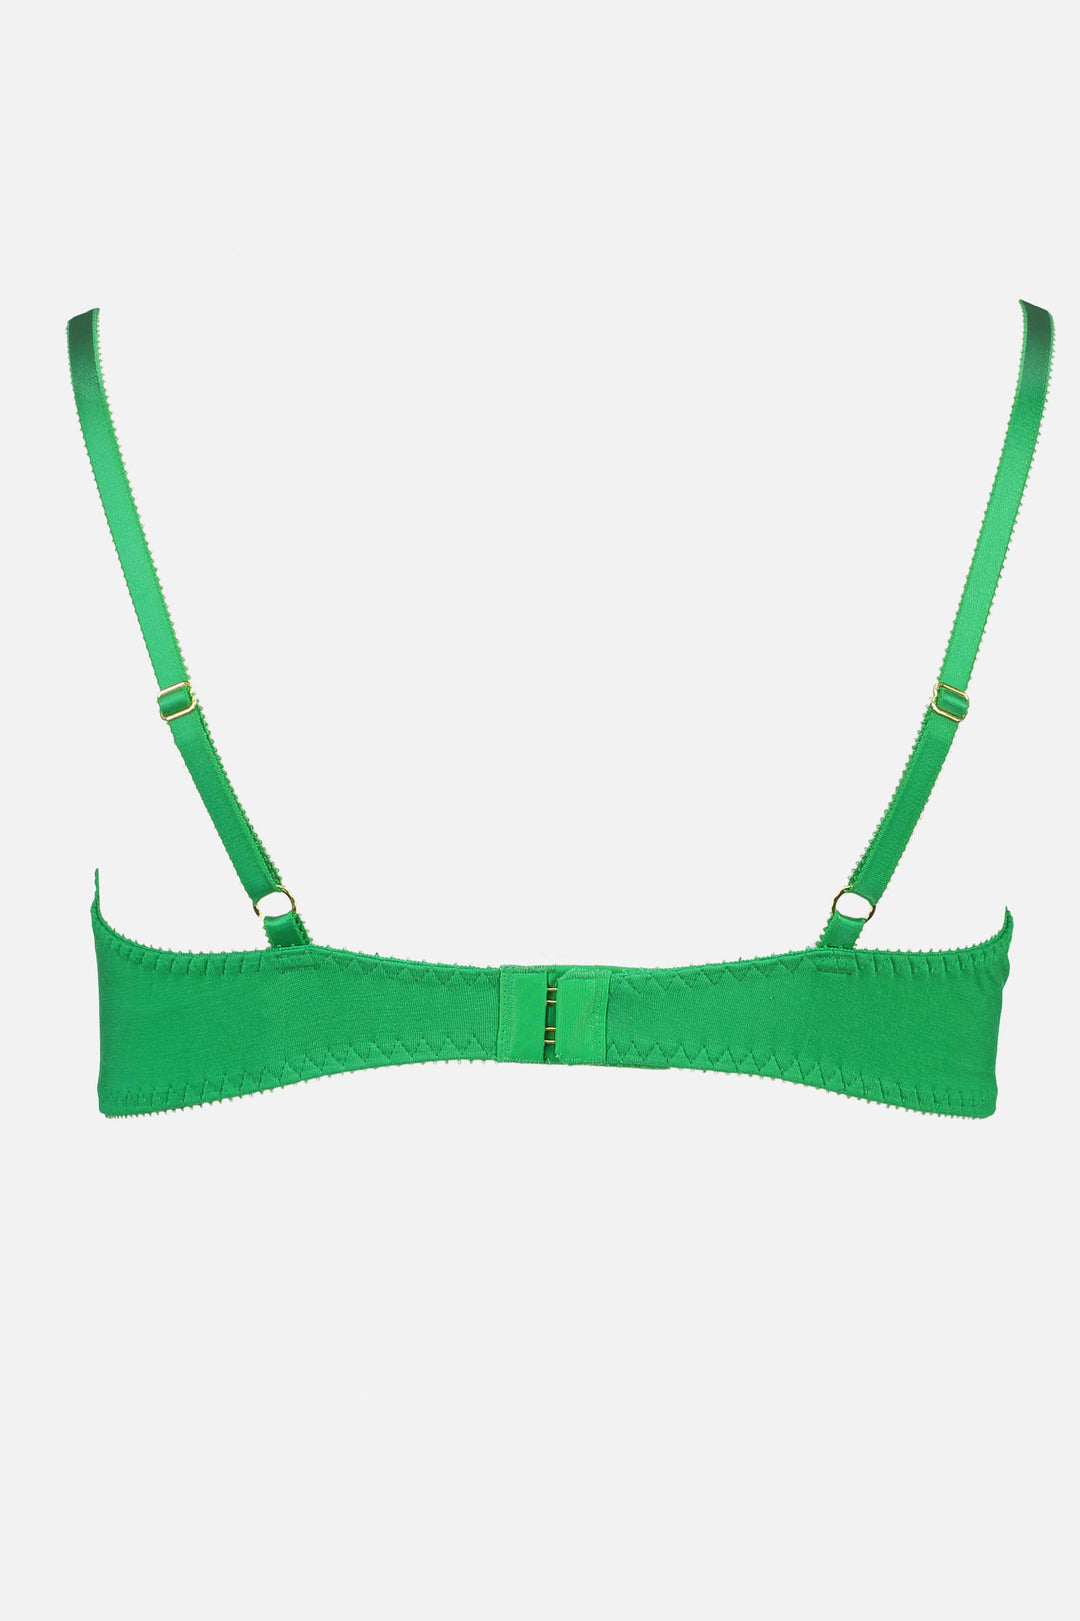 Videris Lingerie Angela underwire free soft cup bra in green TENCEL™ features adjustable back straps and back closure